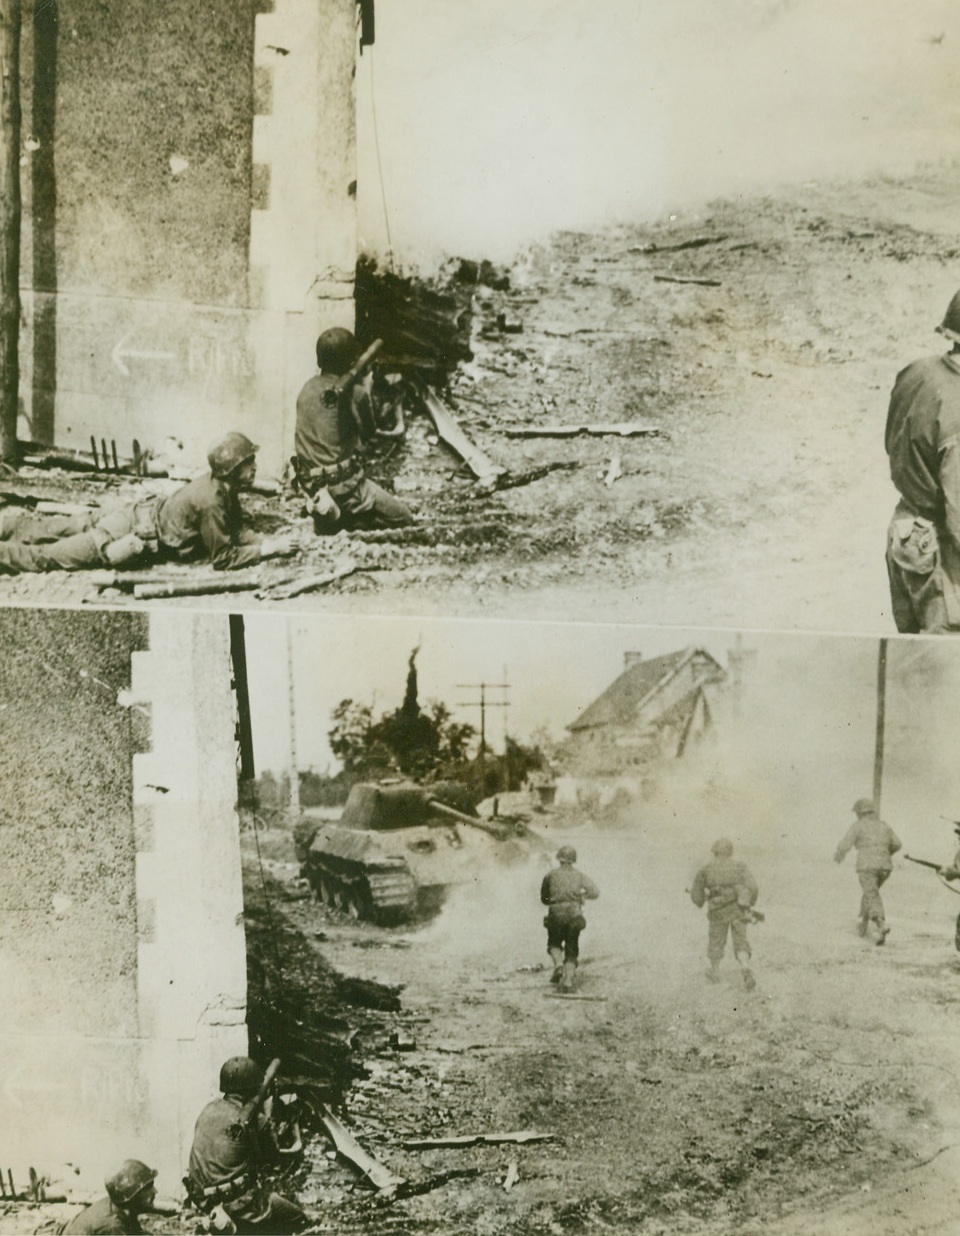 BAZOOKA KNOCKS OUT NAZI TANK, 7/30/1944. NORMANDY, FRANCE—This dramatic photo series shows the destruction of a Nazi tank that had blocked the advance of our forces through a Normandy village. At top, Bazooka gunners have just fired their projectile, which explodes and envelopes the tank in smoke and flames. In the bottom photo a detachment of infantrymen, under Sgt. James F. Kelly, Boston, Mass., push toward the battered tank to care for any possible survivors from the tank’s crew. Credit (ACME);